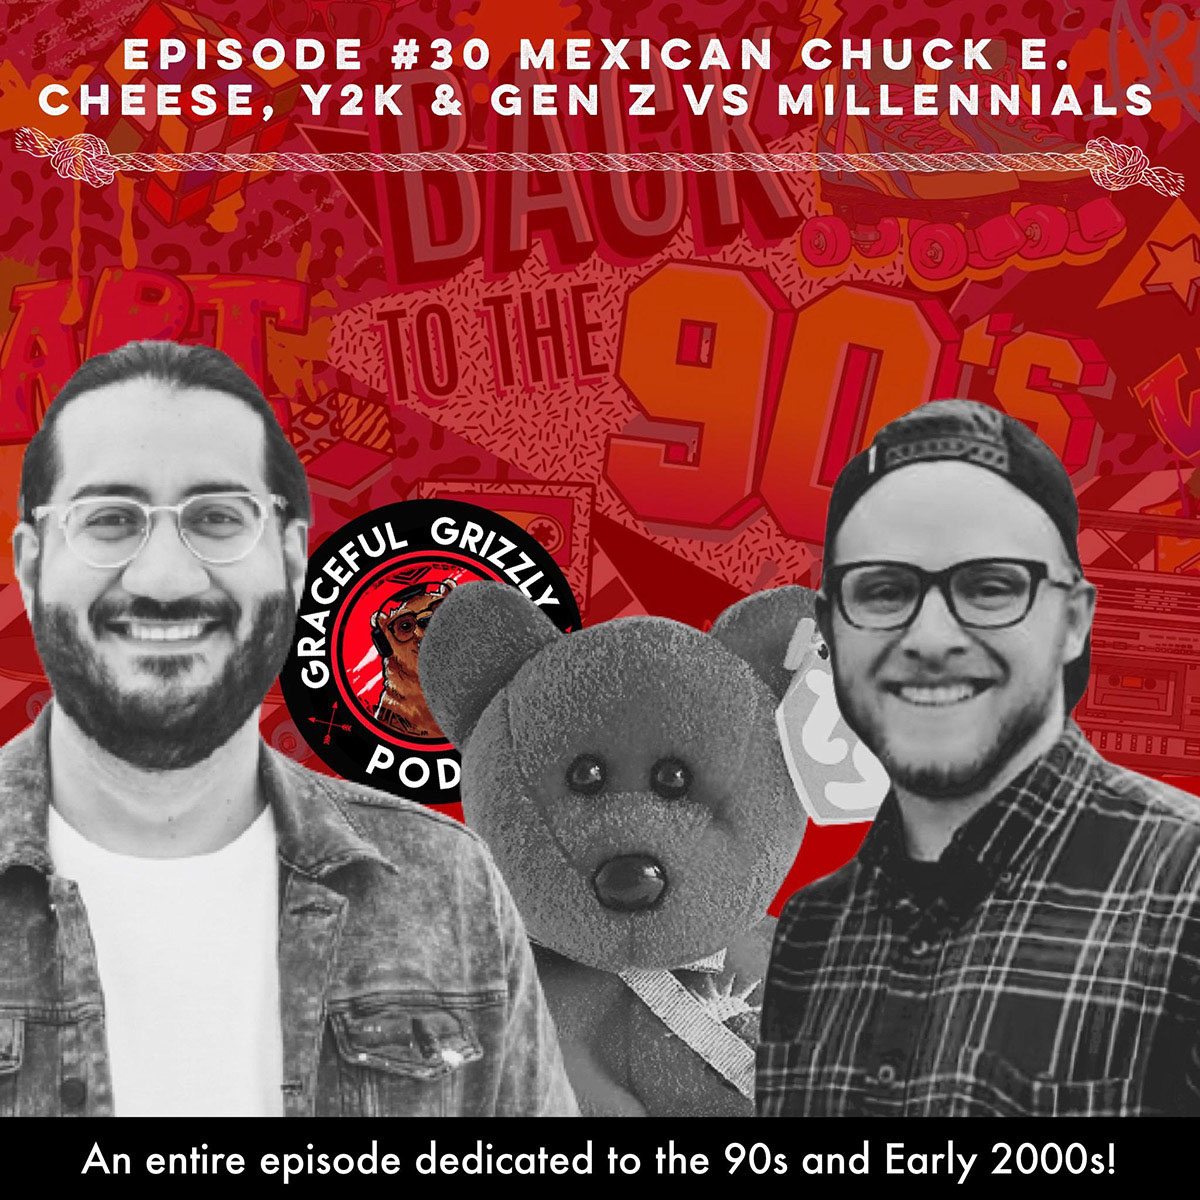 Episode 30 - Graceful Grizzly Podcast